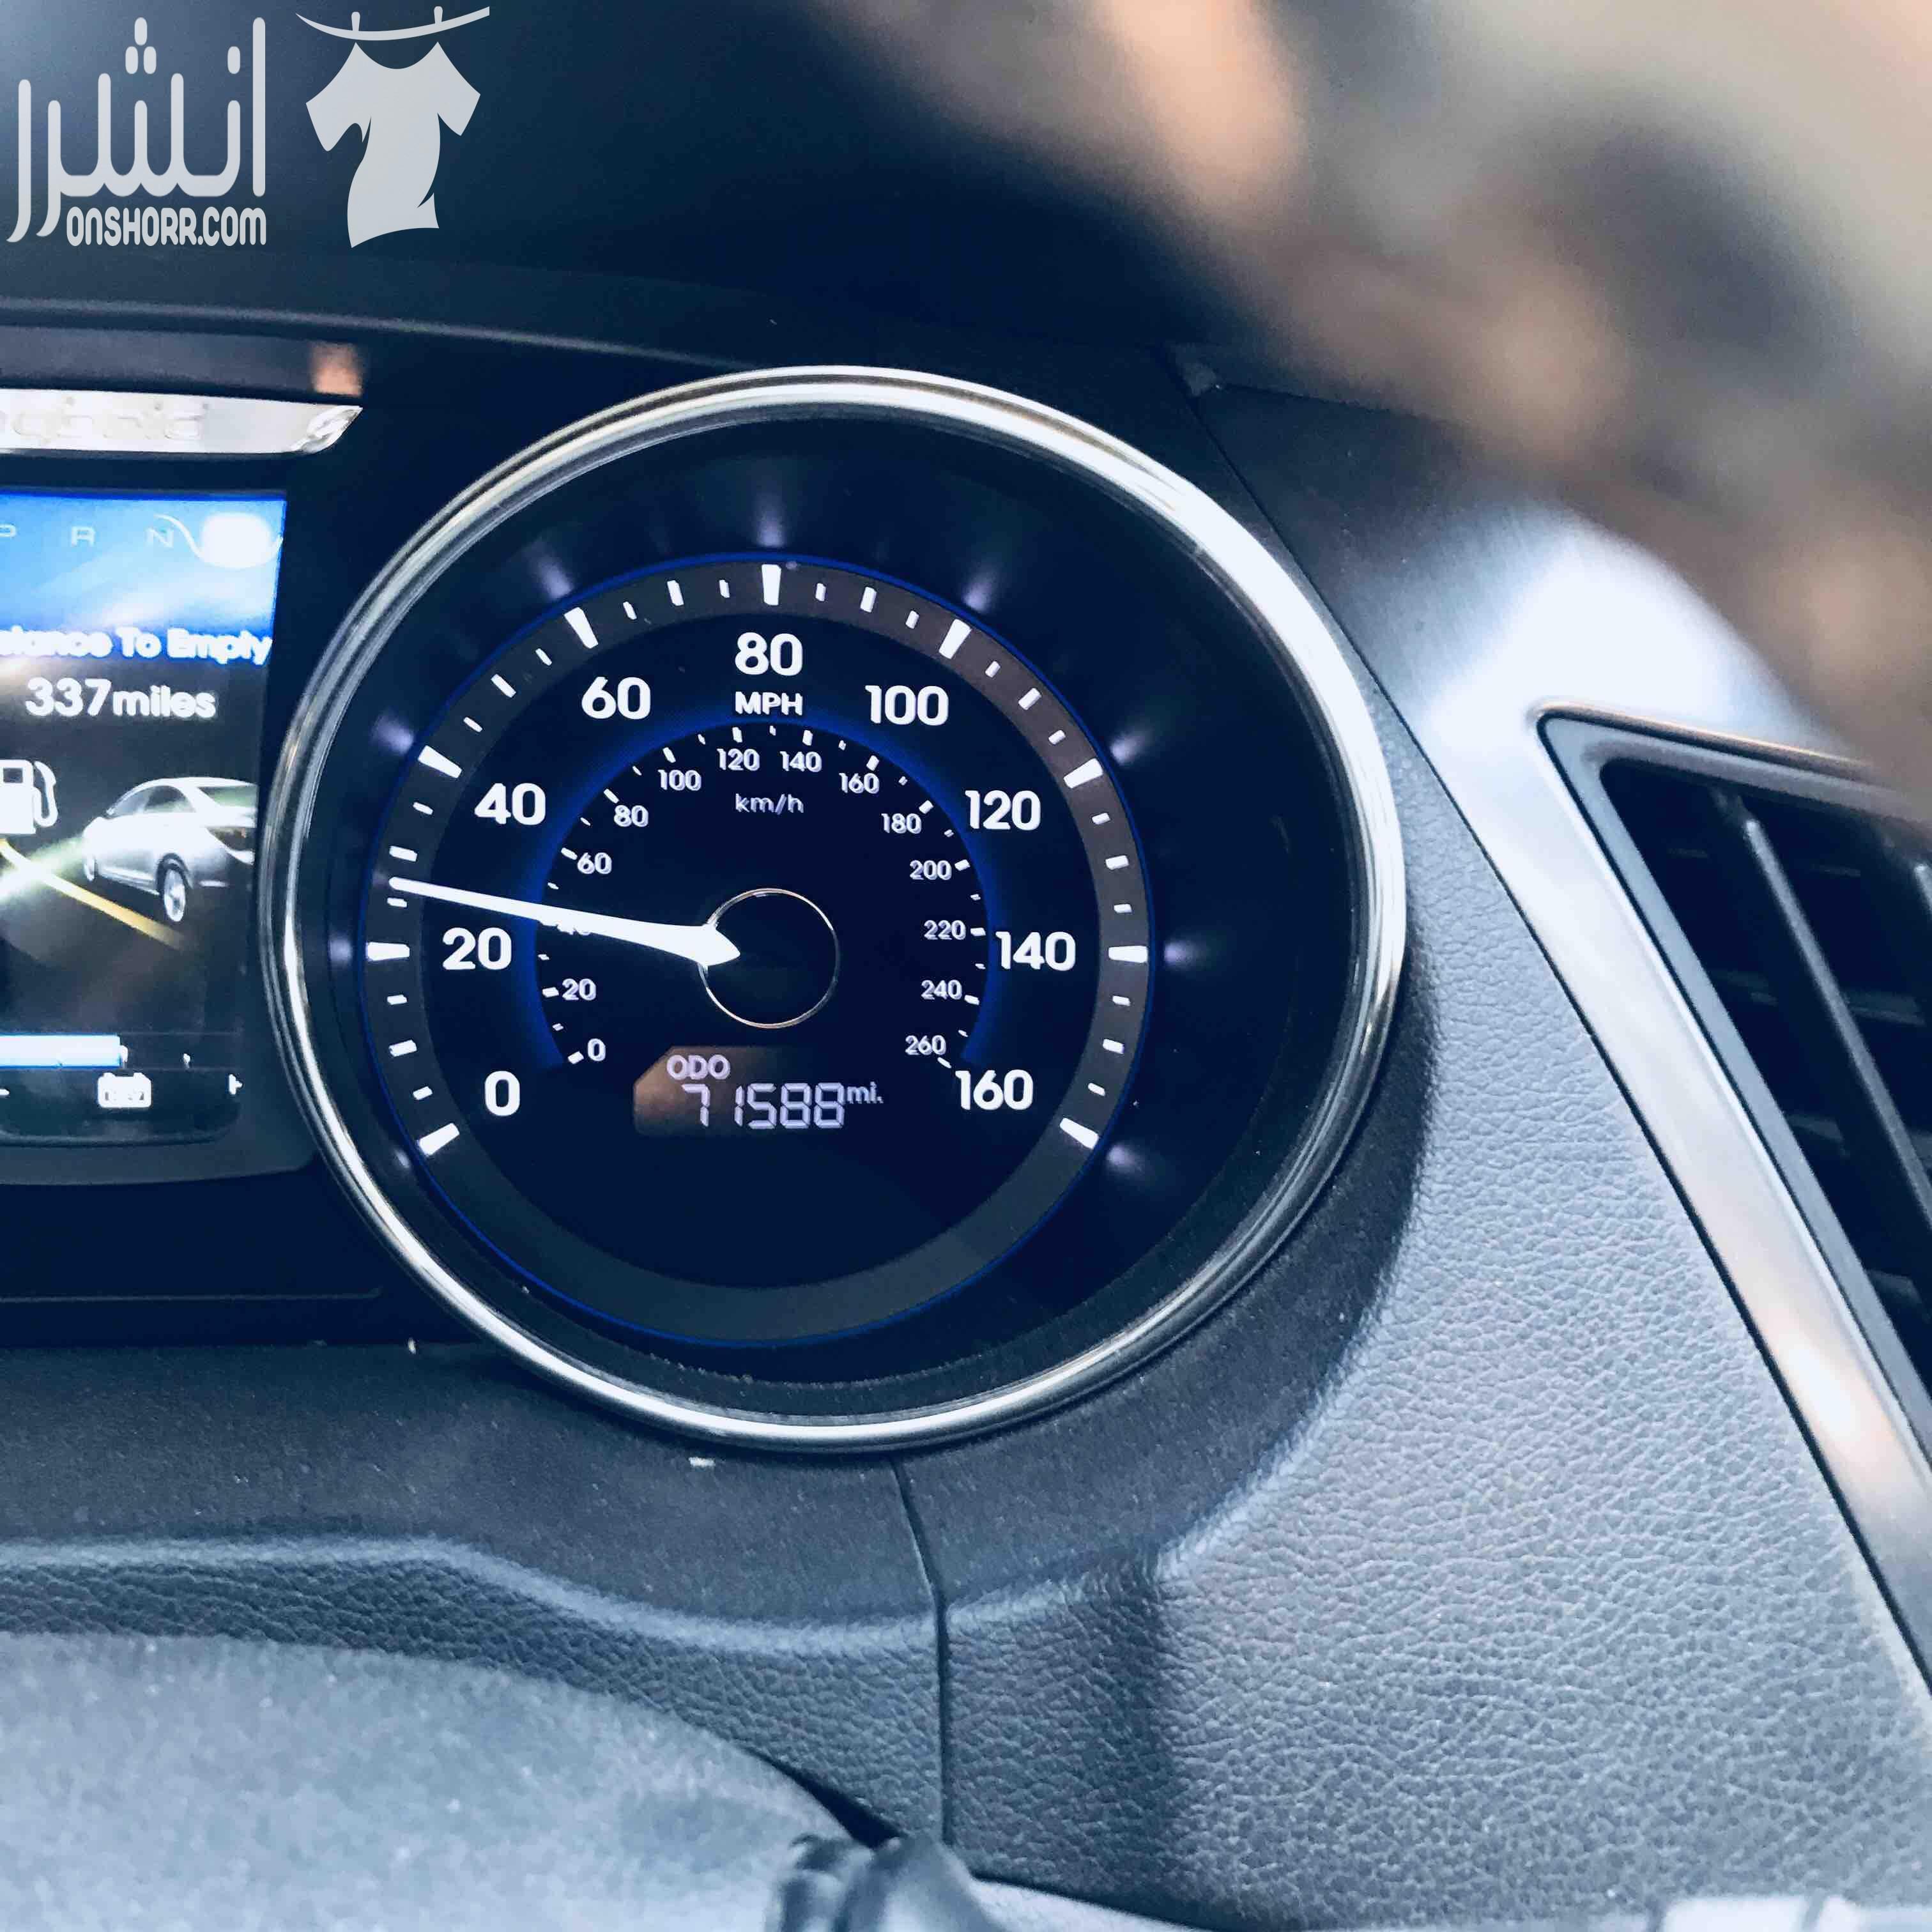 2016 Mercedes Benz G63 AMG for sale, slightly used with low mileage and i am selling this car due to some personal issues, very good Interior & Exterior wit-  هونداي سوناتا 2011...